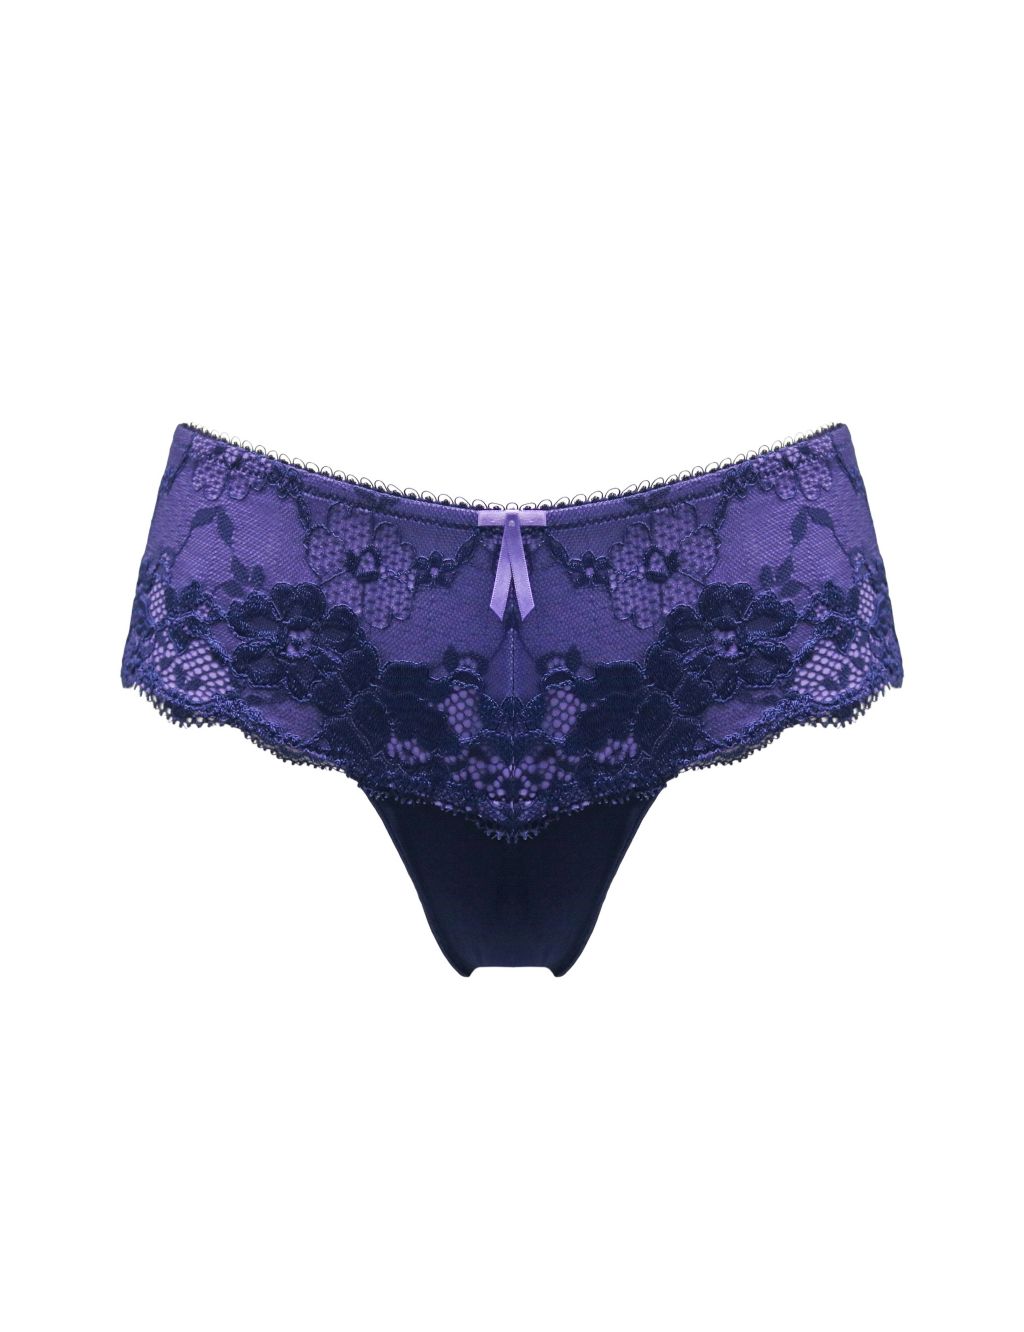 Amour French Knickers image 2